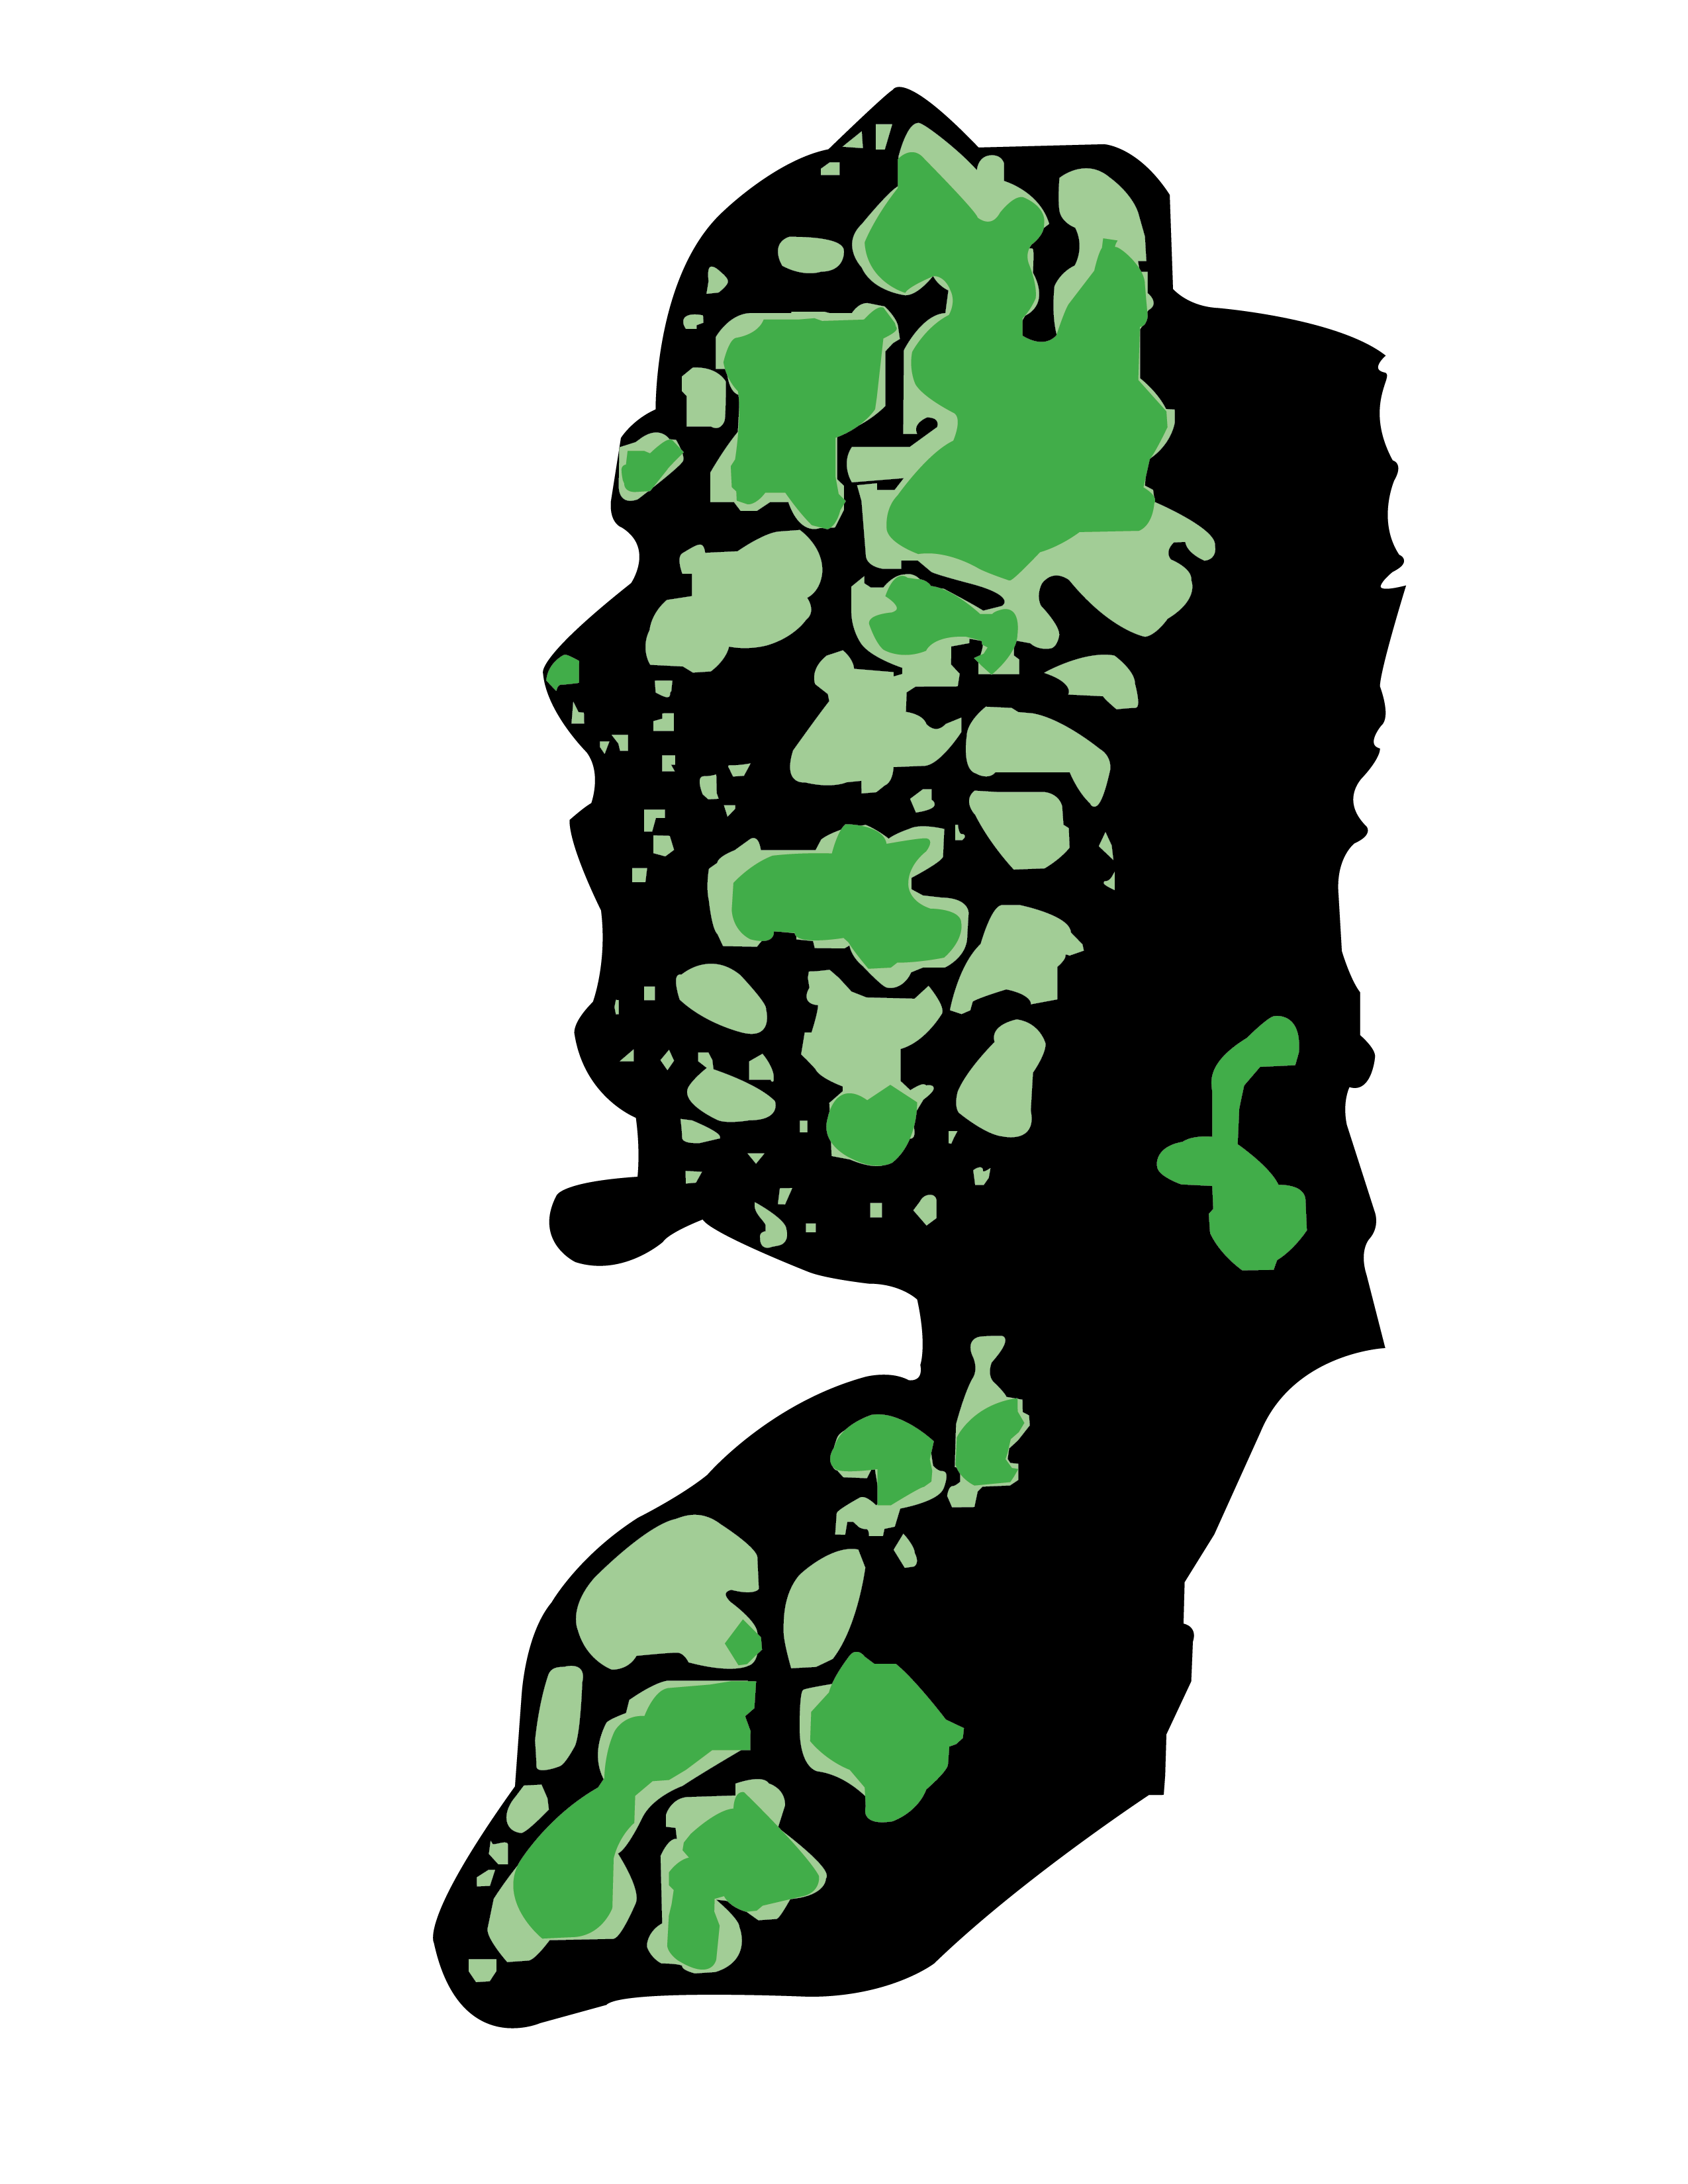 WEST BANK MAP 3